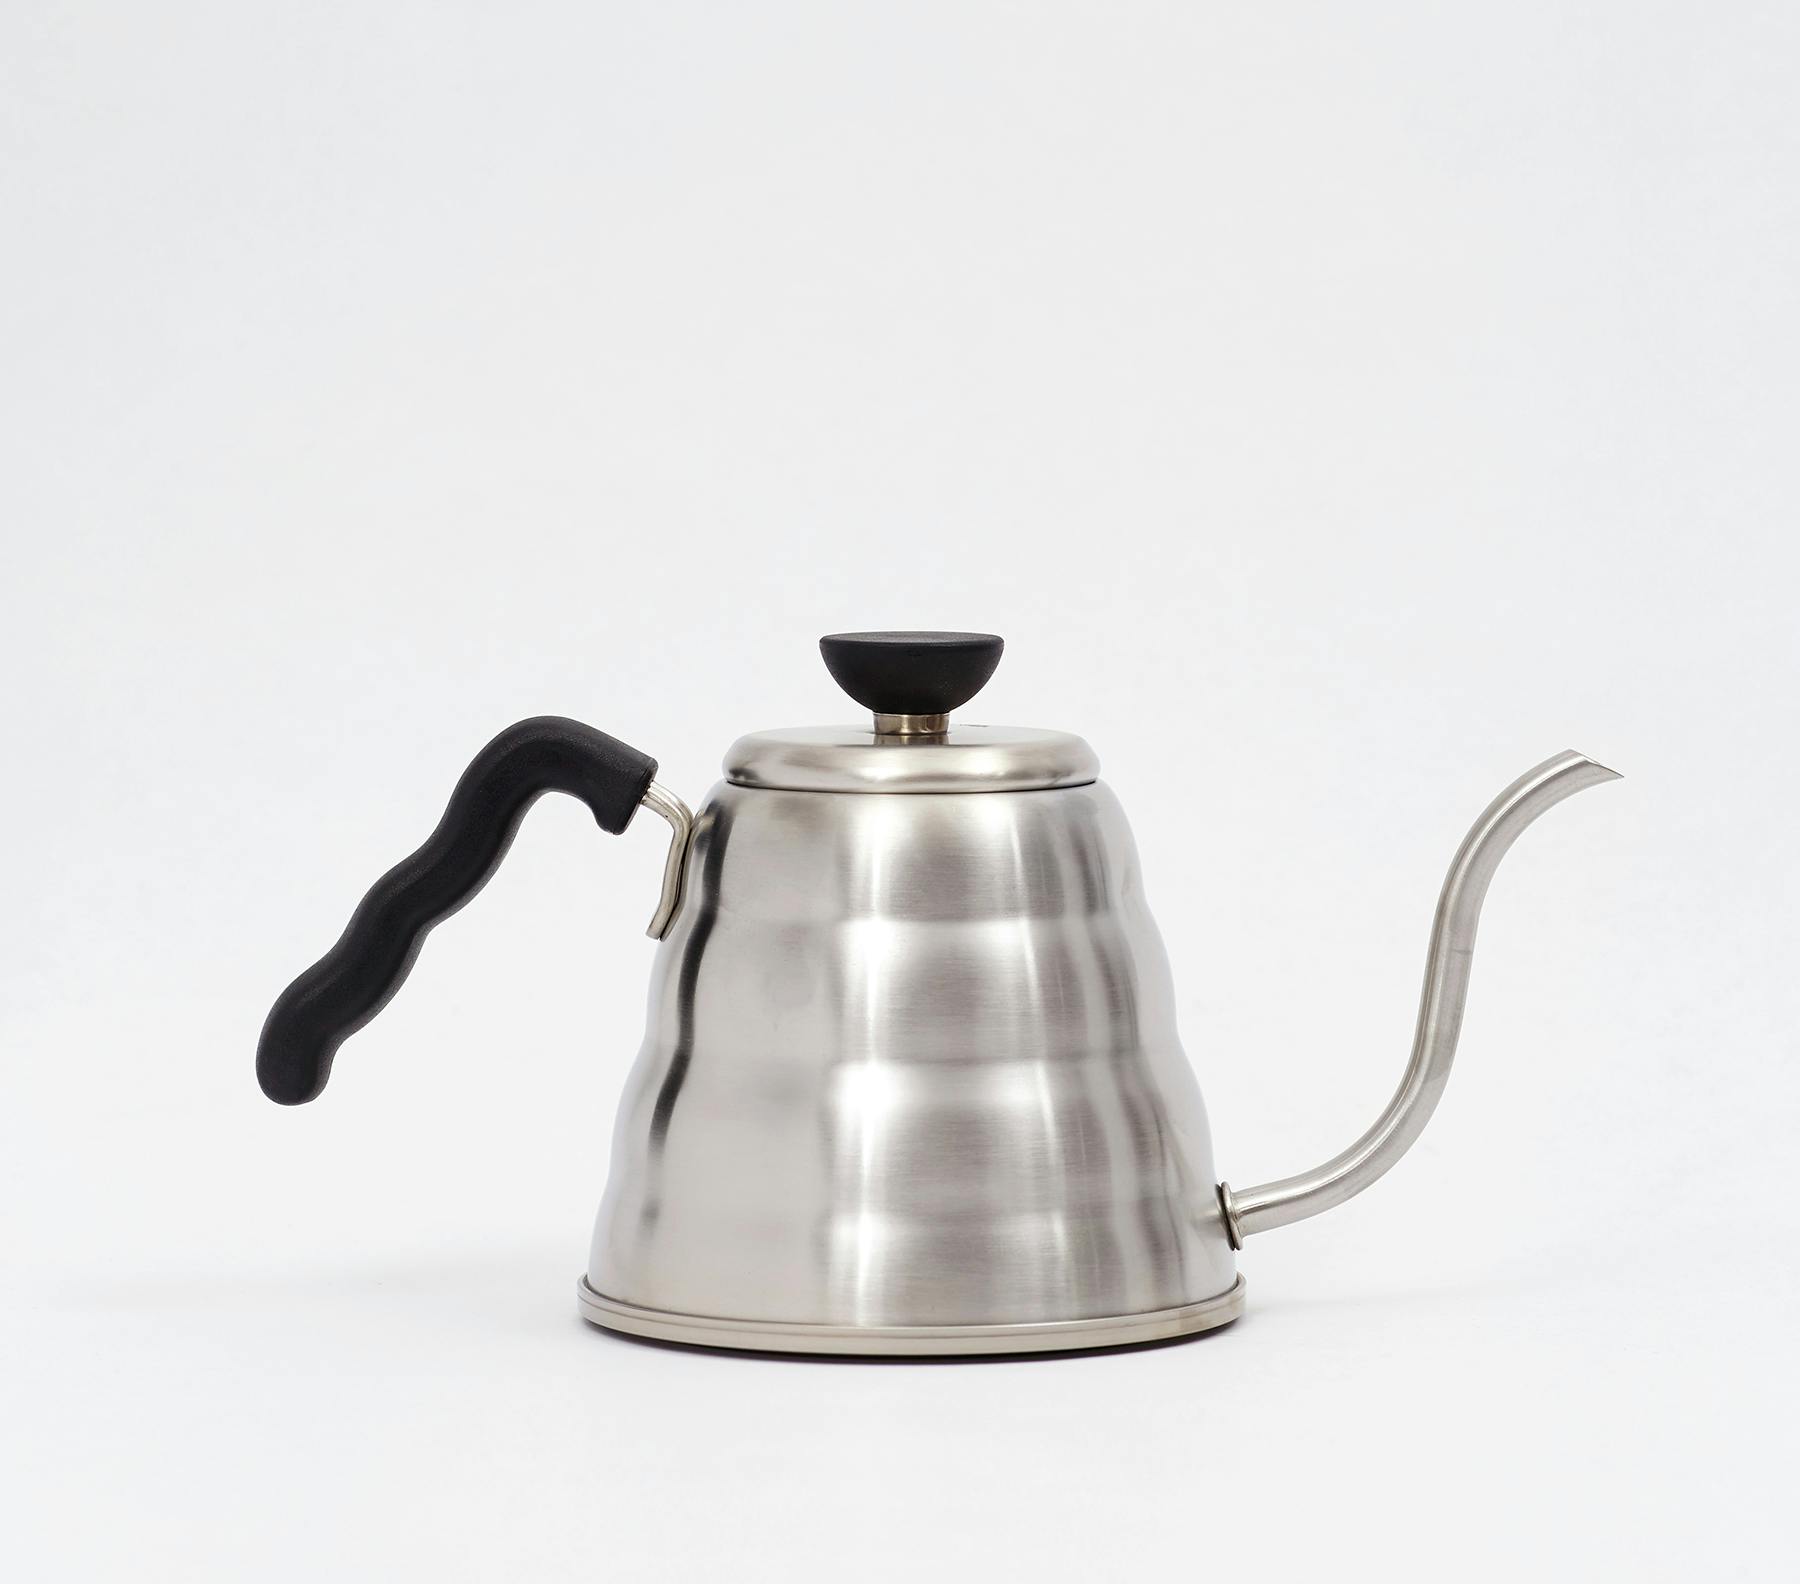 Hario kettle 2nd